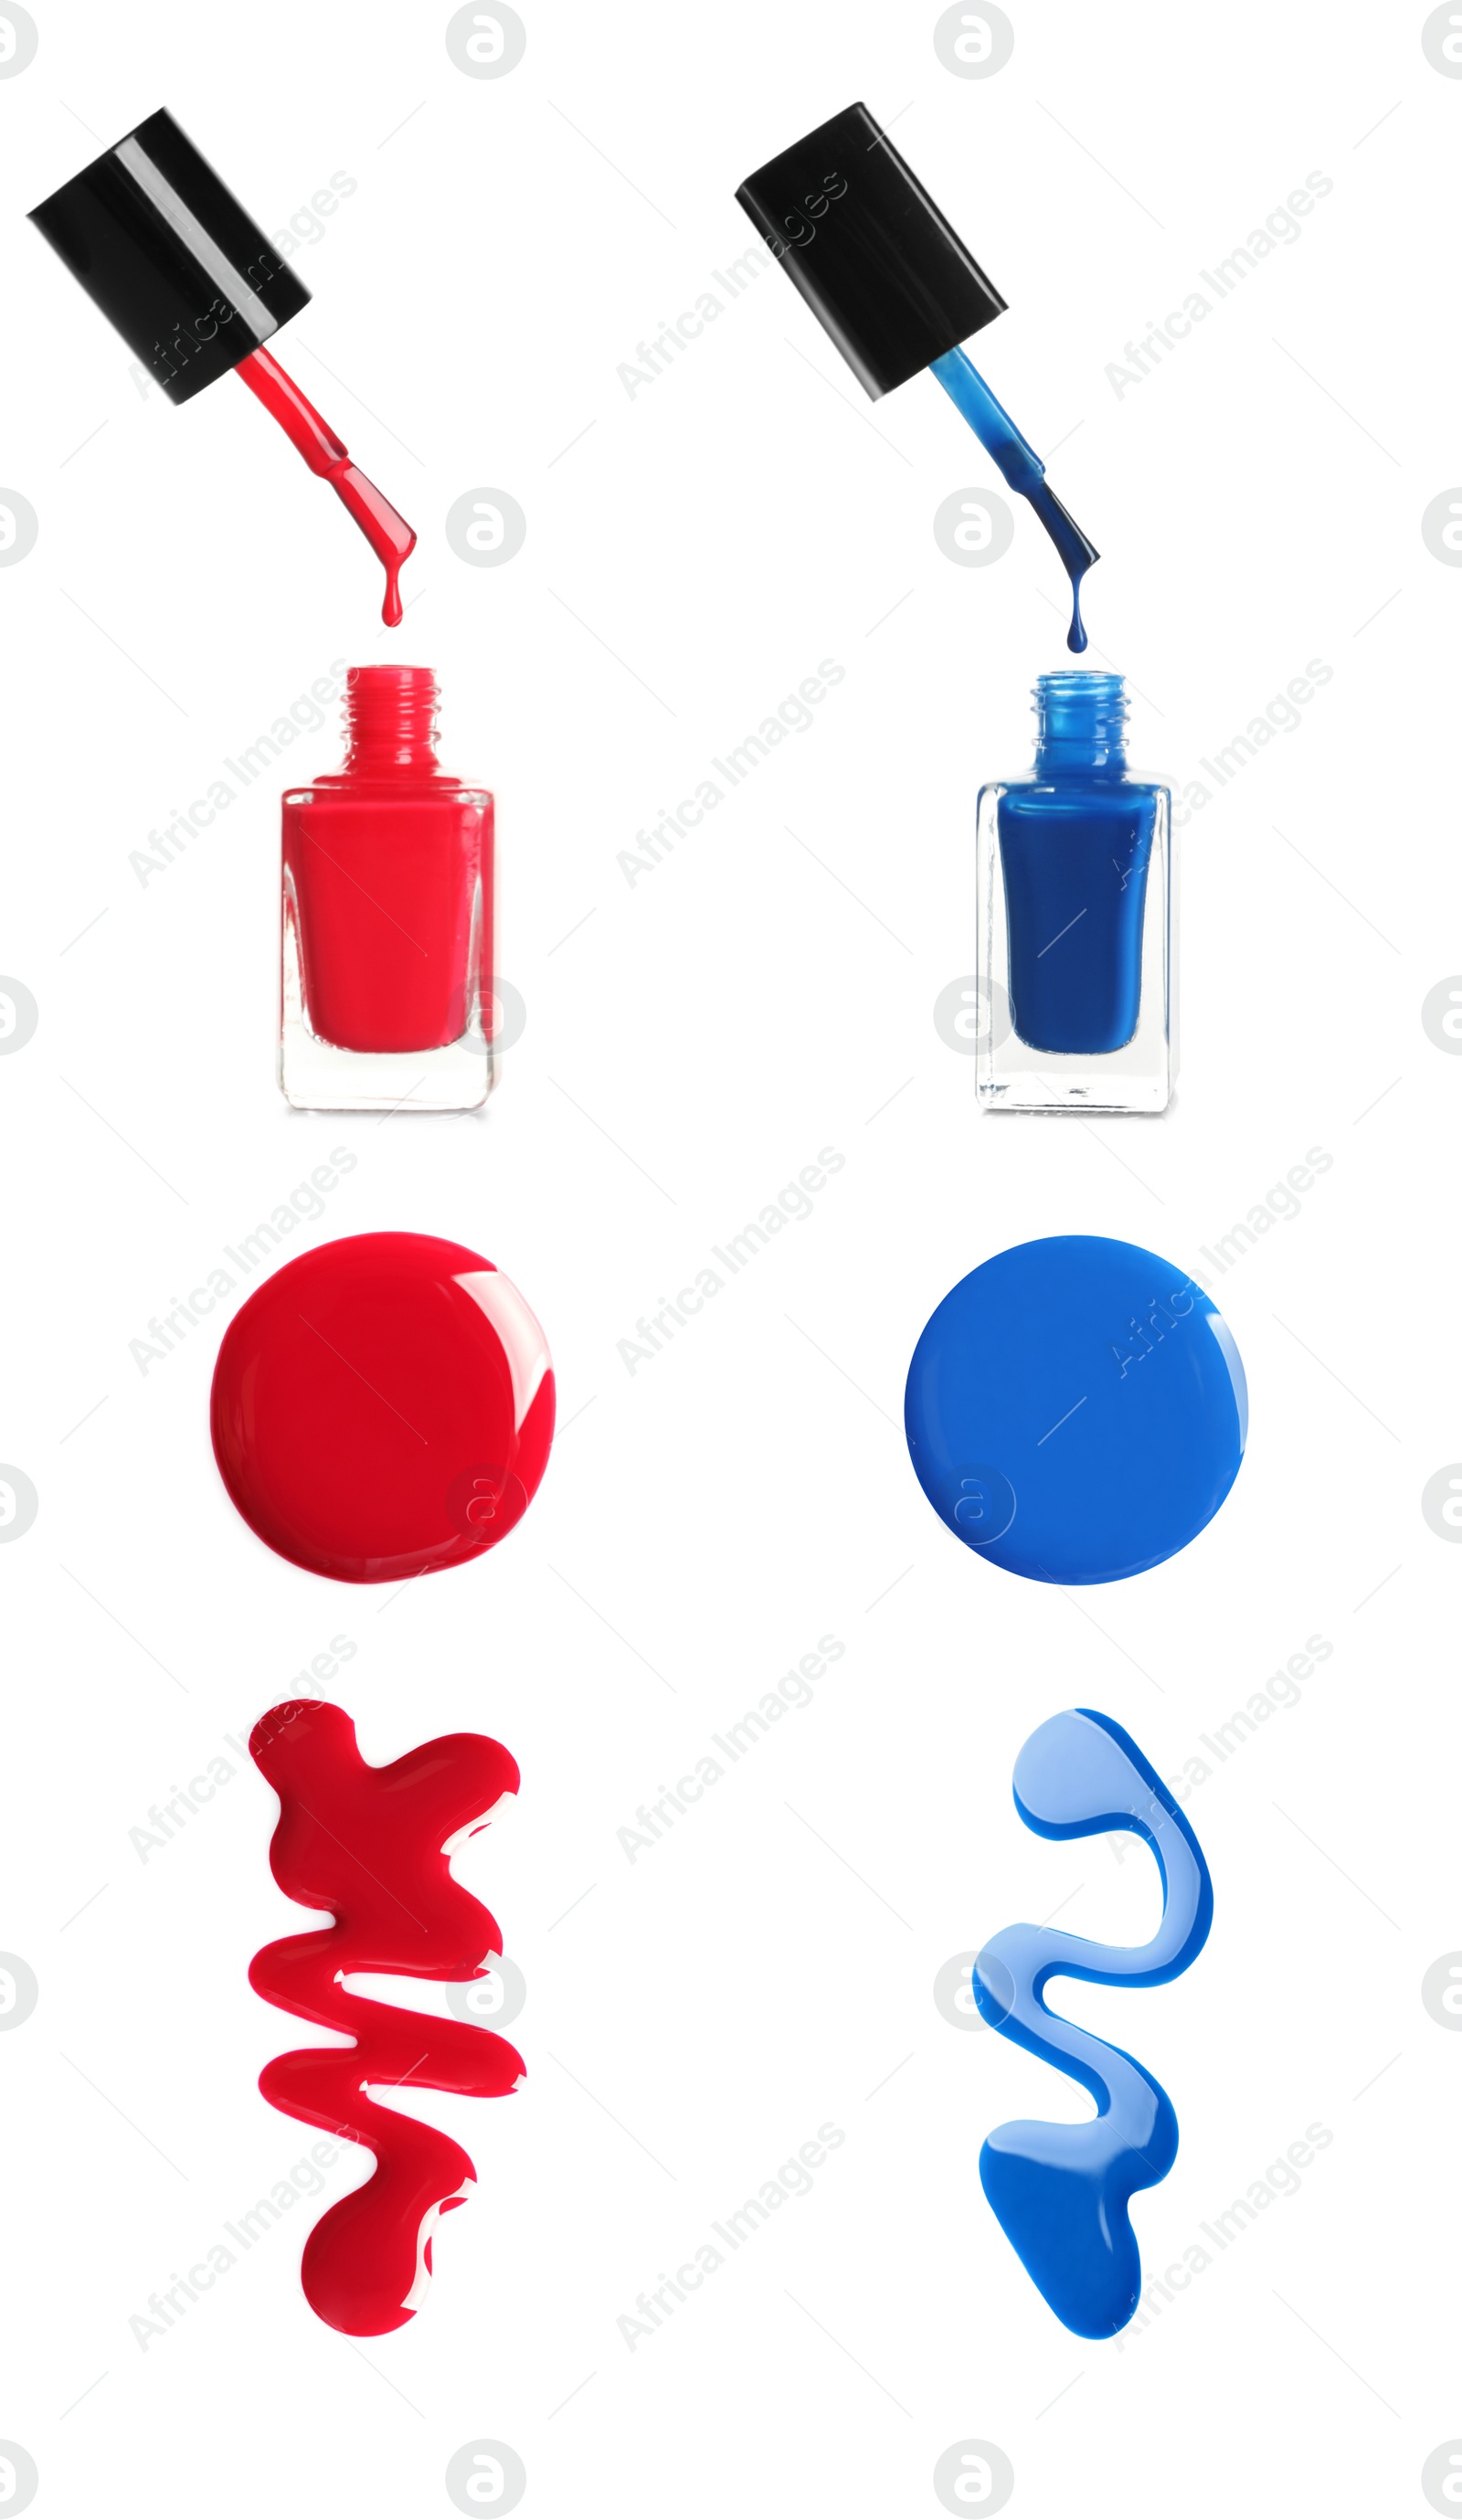 Image of Collage of red and blue nail polishes on white background